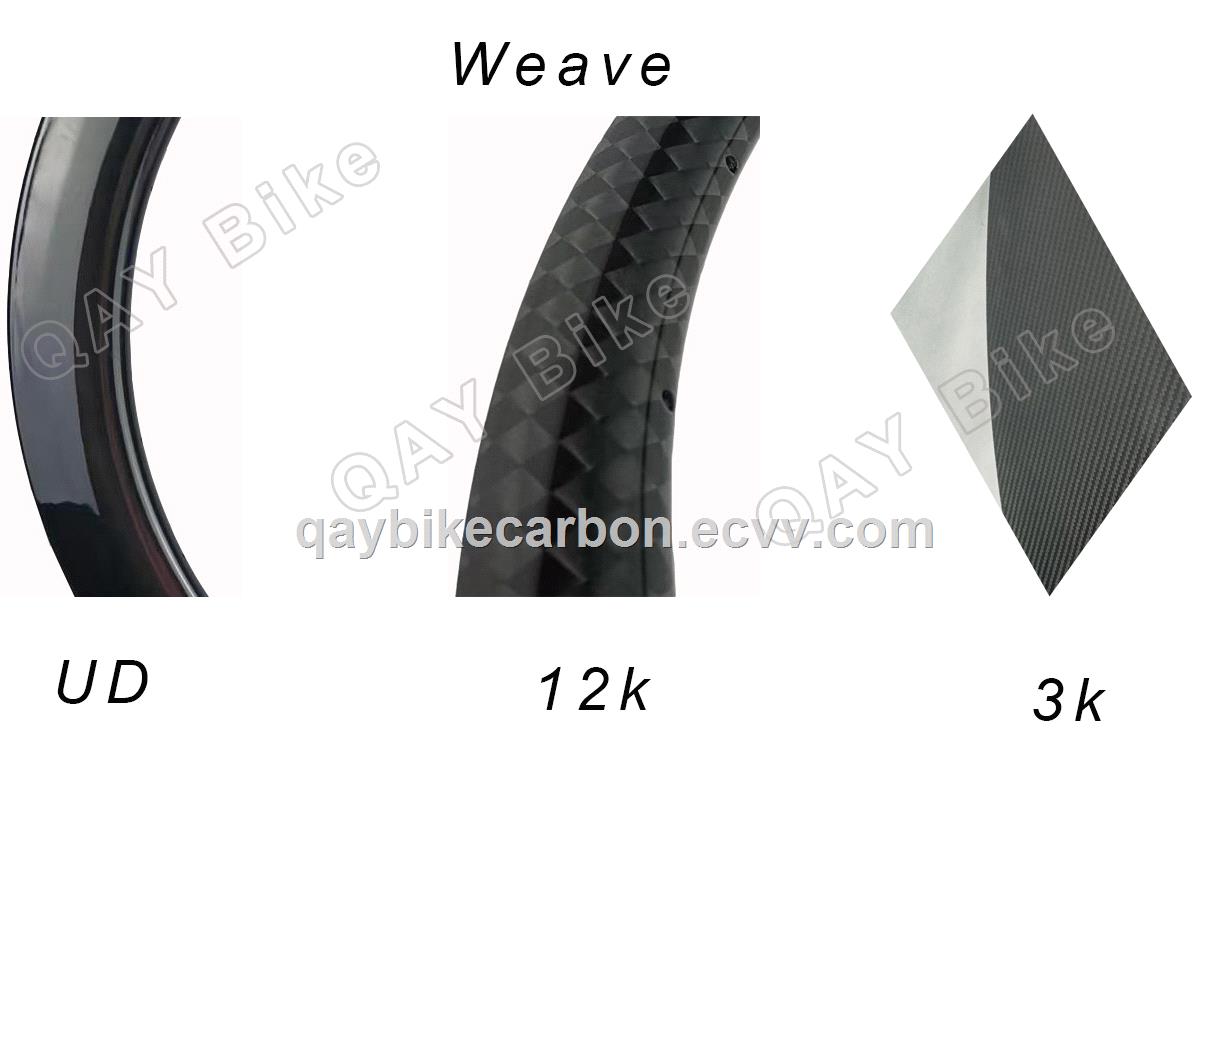 650B TUBELESS HOOKLESS CARBON BICYCLE rims